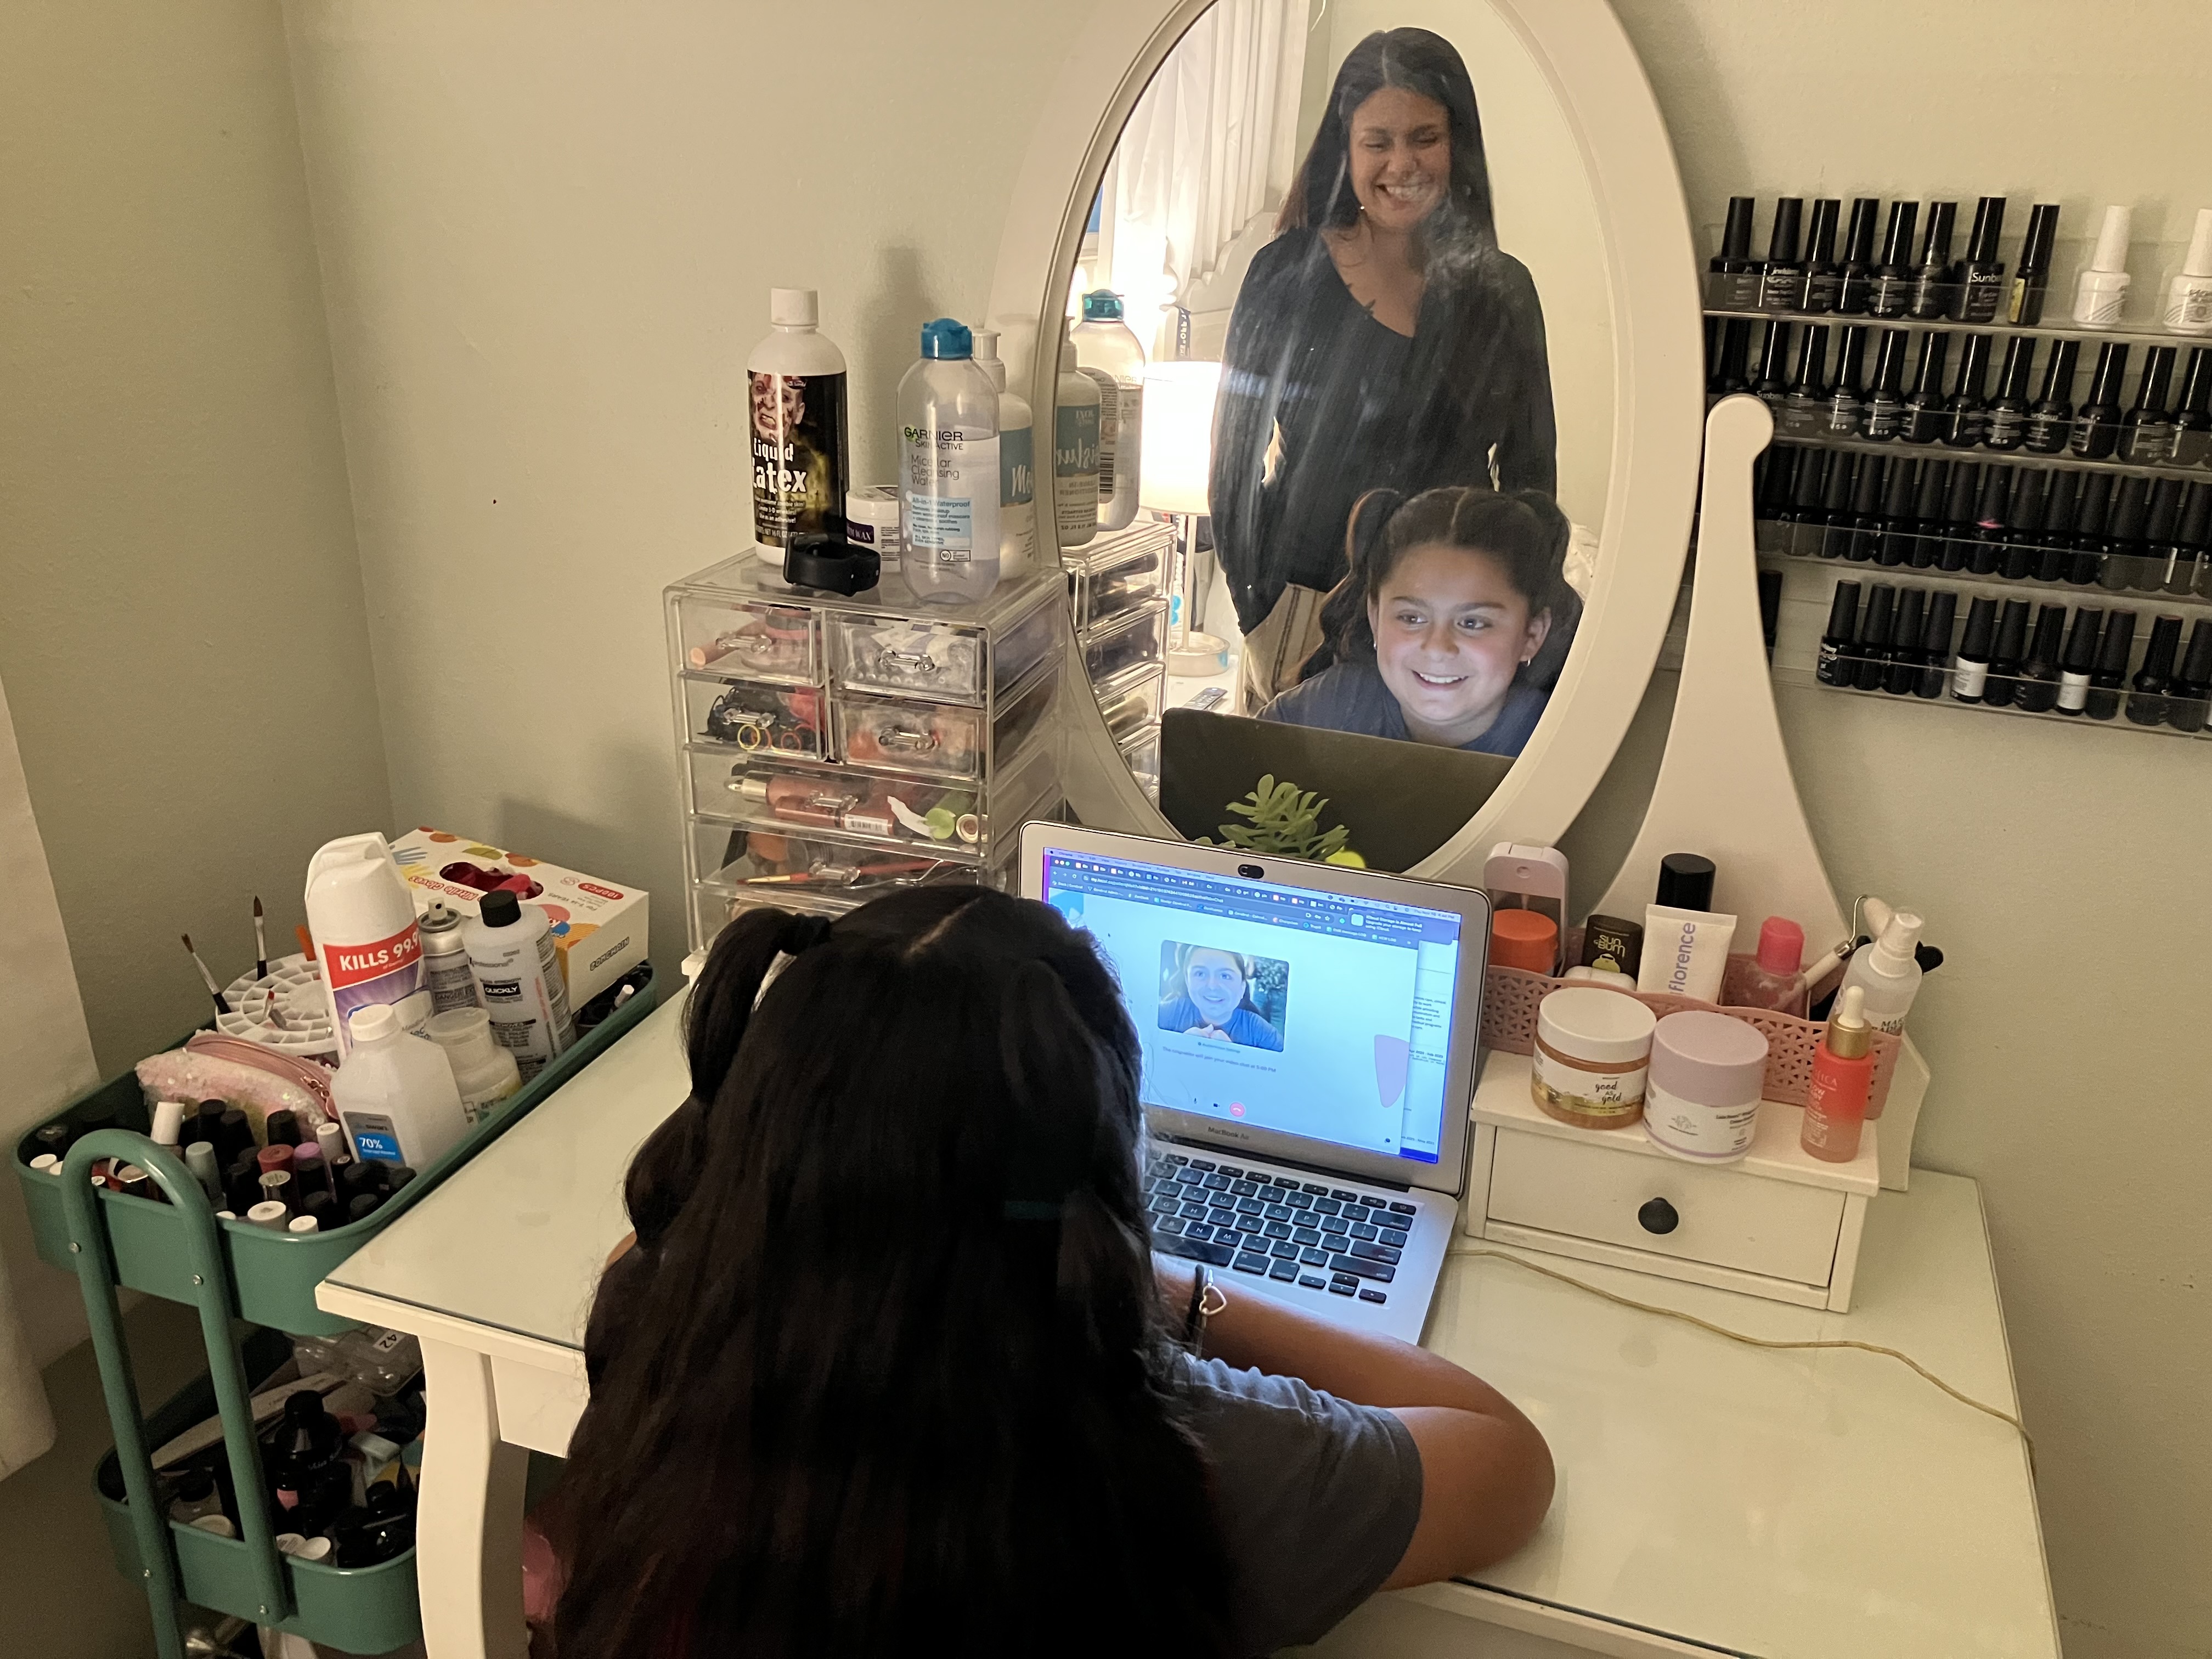 Anjelah Salazar, a young girl, sits at her computer at a desk. A mirror on the desk reflects her mother standing behind her, smiling.